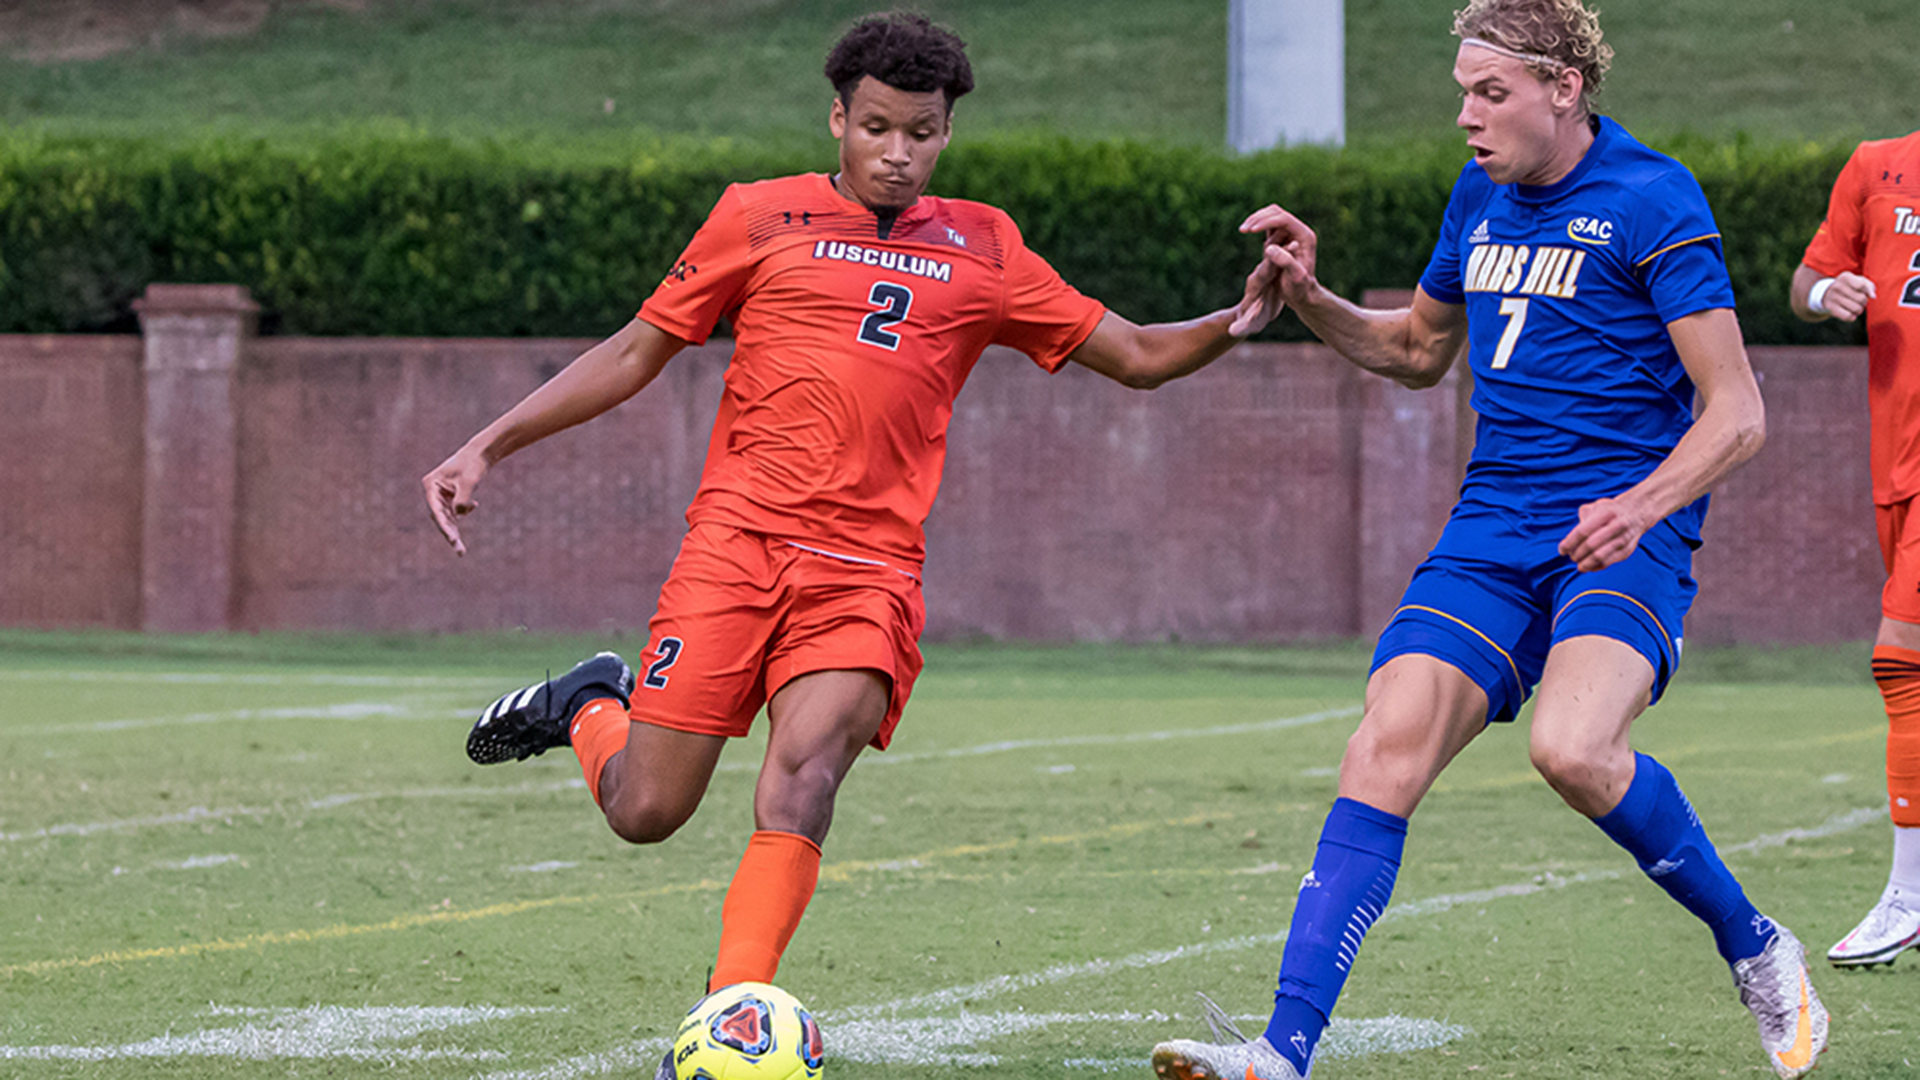 Pioneers nearly equalize in final seconds, but Carson-Newman escapes with 1-0 win